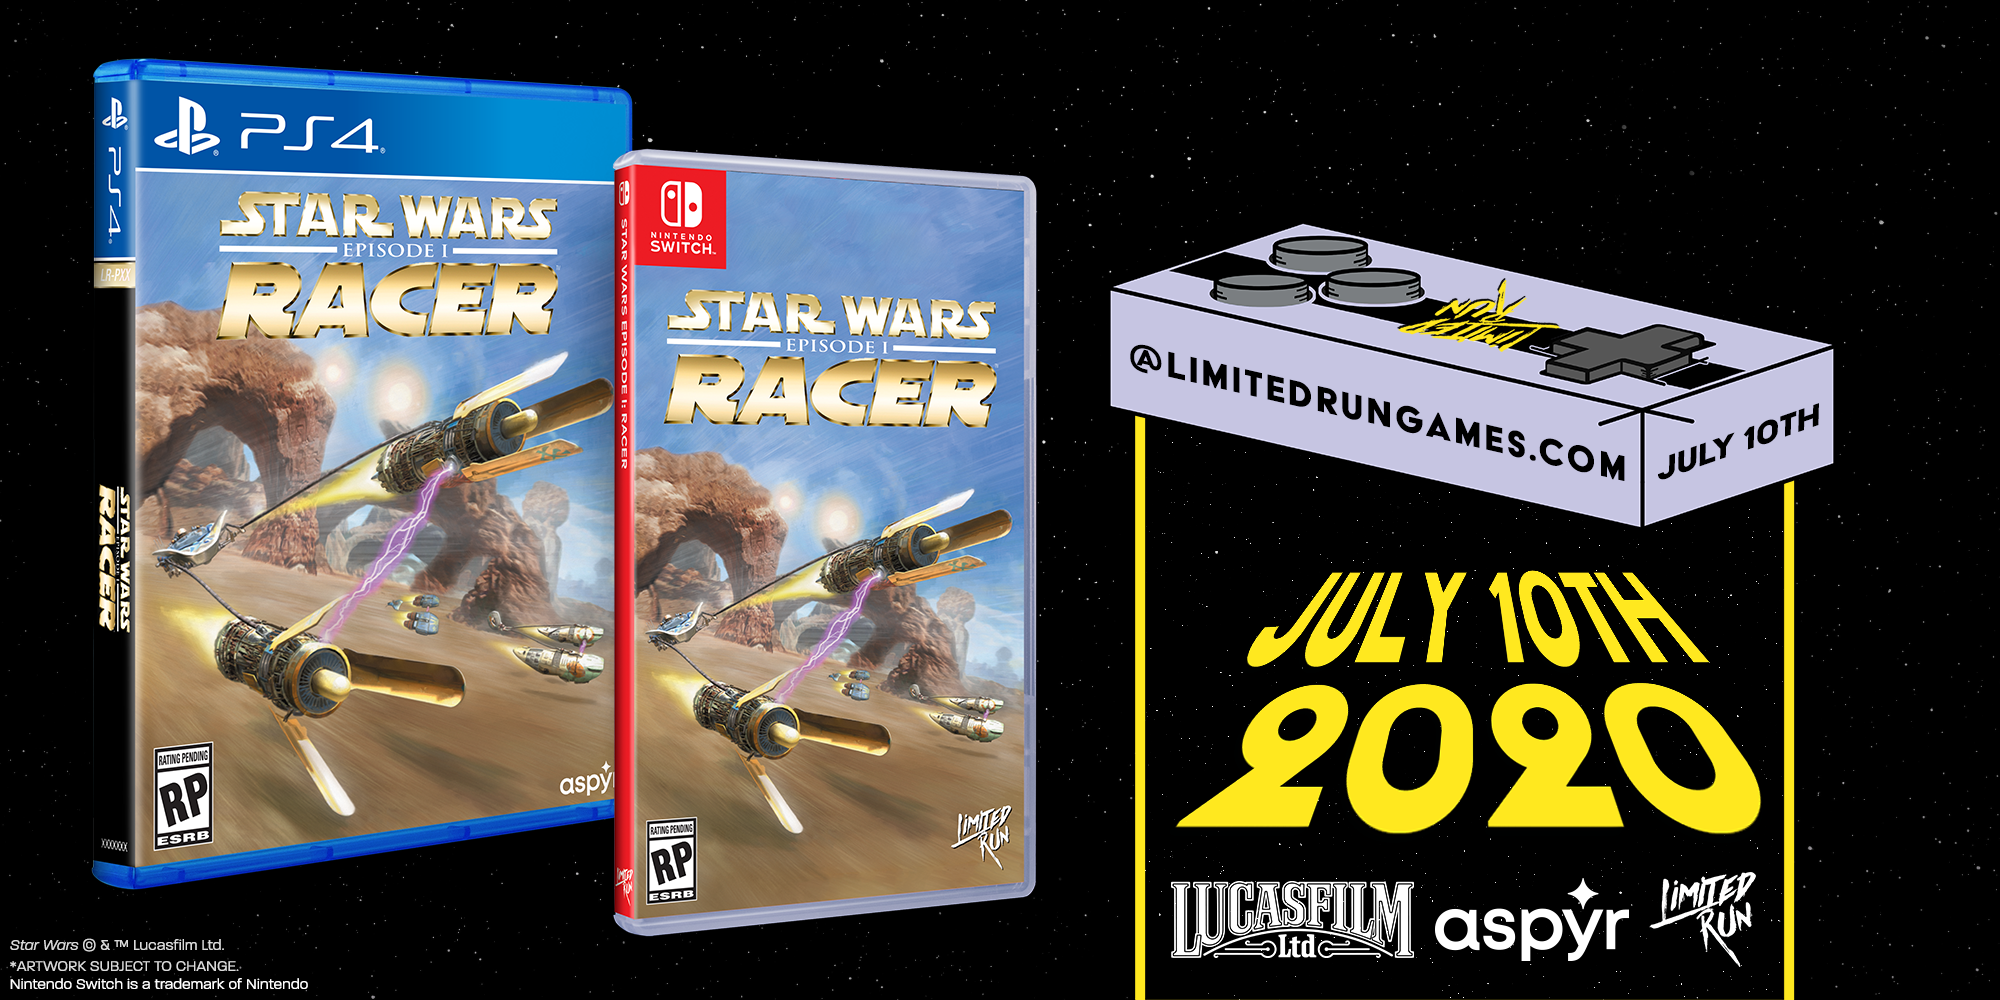 Star Wars: Episode I Racer release date for Nintendo Switch, PS4